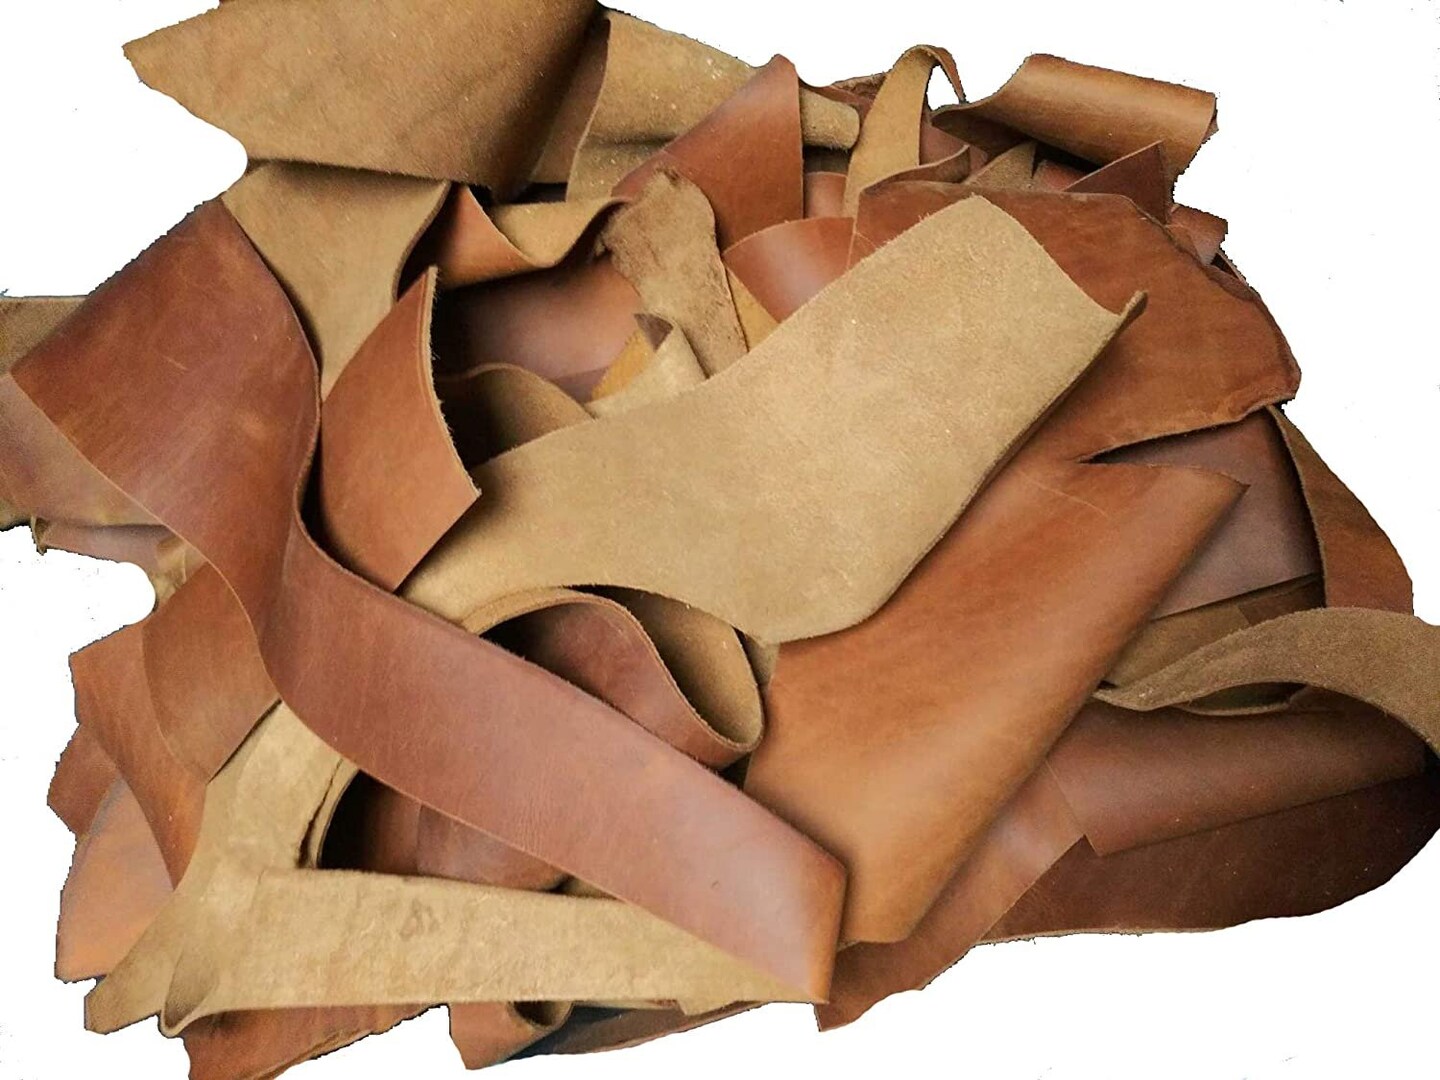 ELW Full Grain Leather 1lb Scraps Tobacco Brown 5/6 OZ (2mm) Perfect for  Crafts, Tooling, Repairs